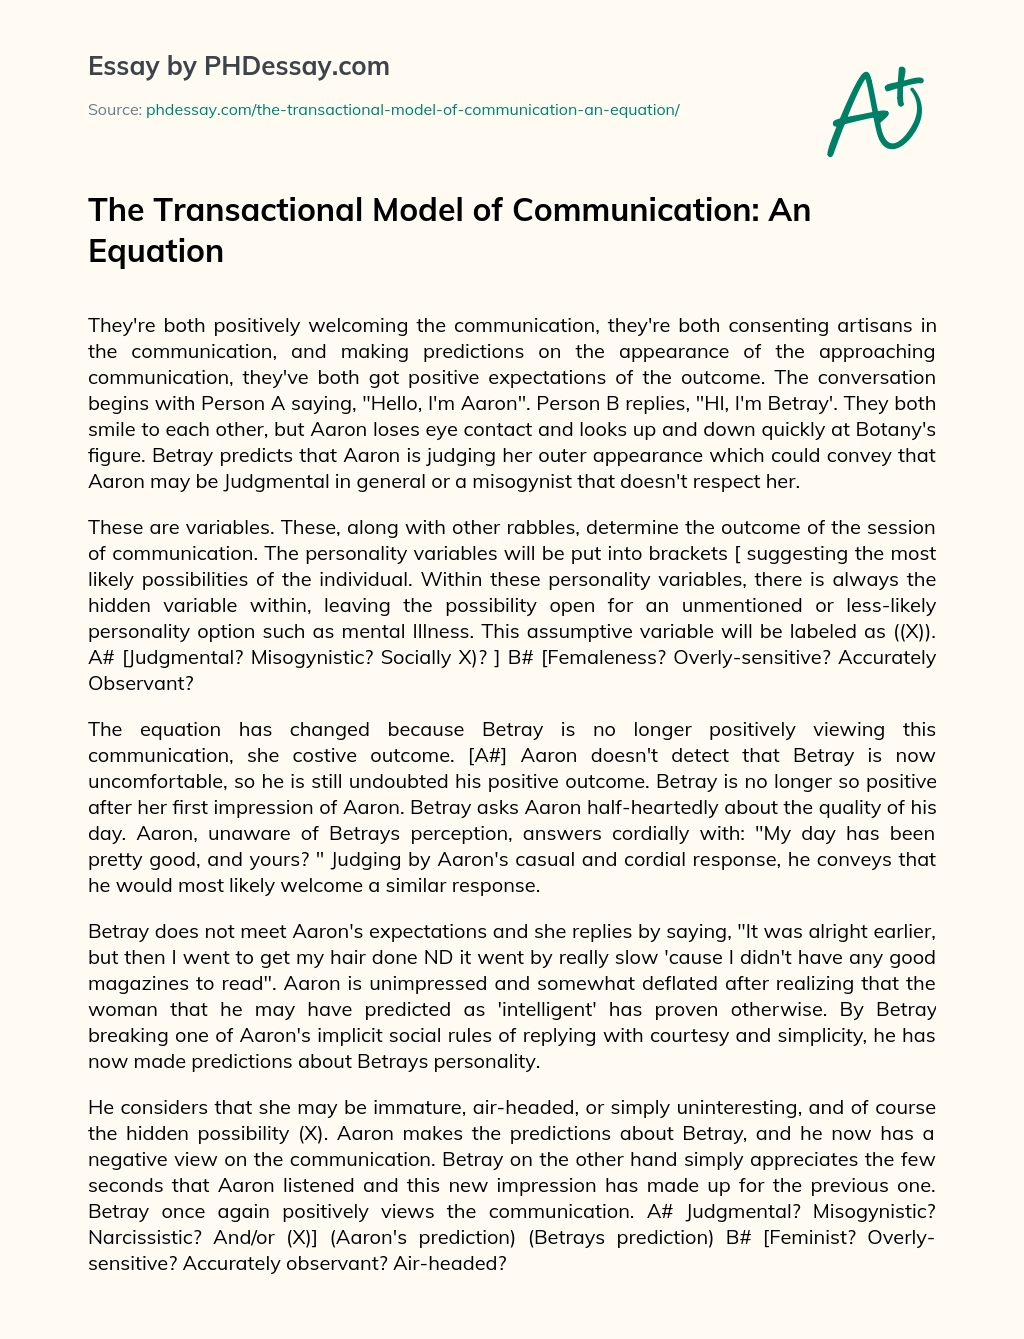 The Transactional Model of Communication: An Equation essay